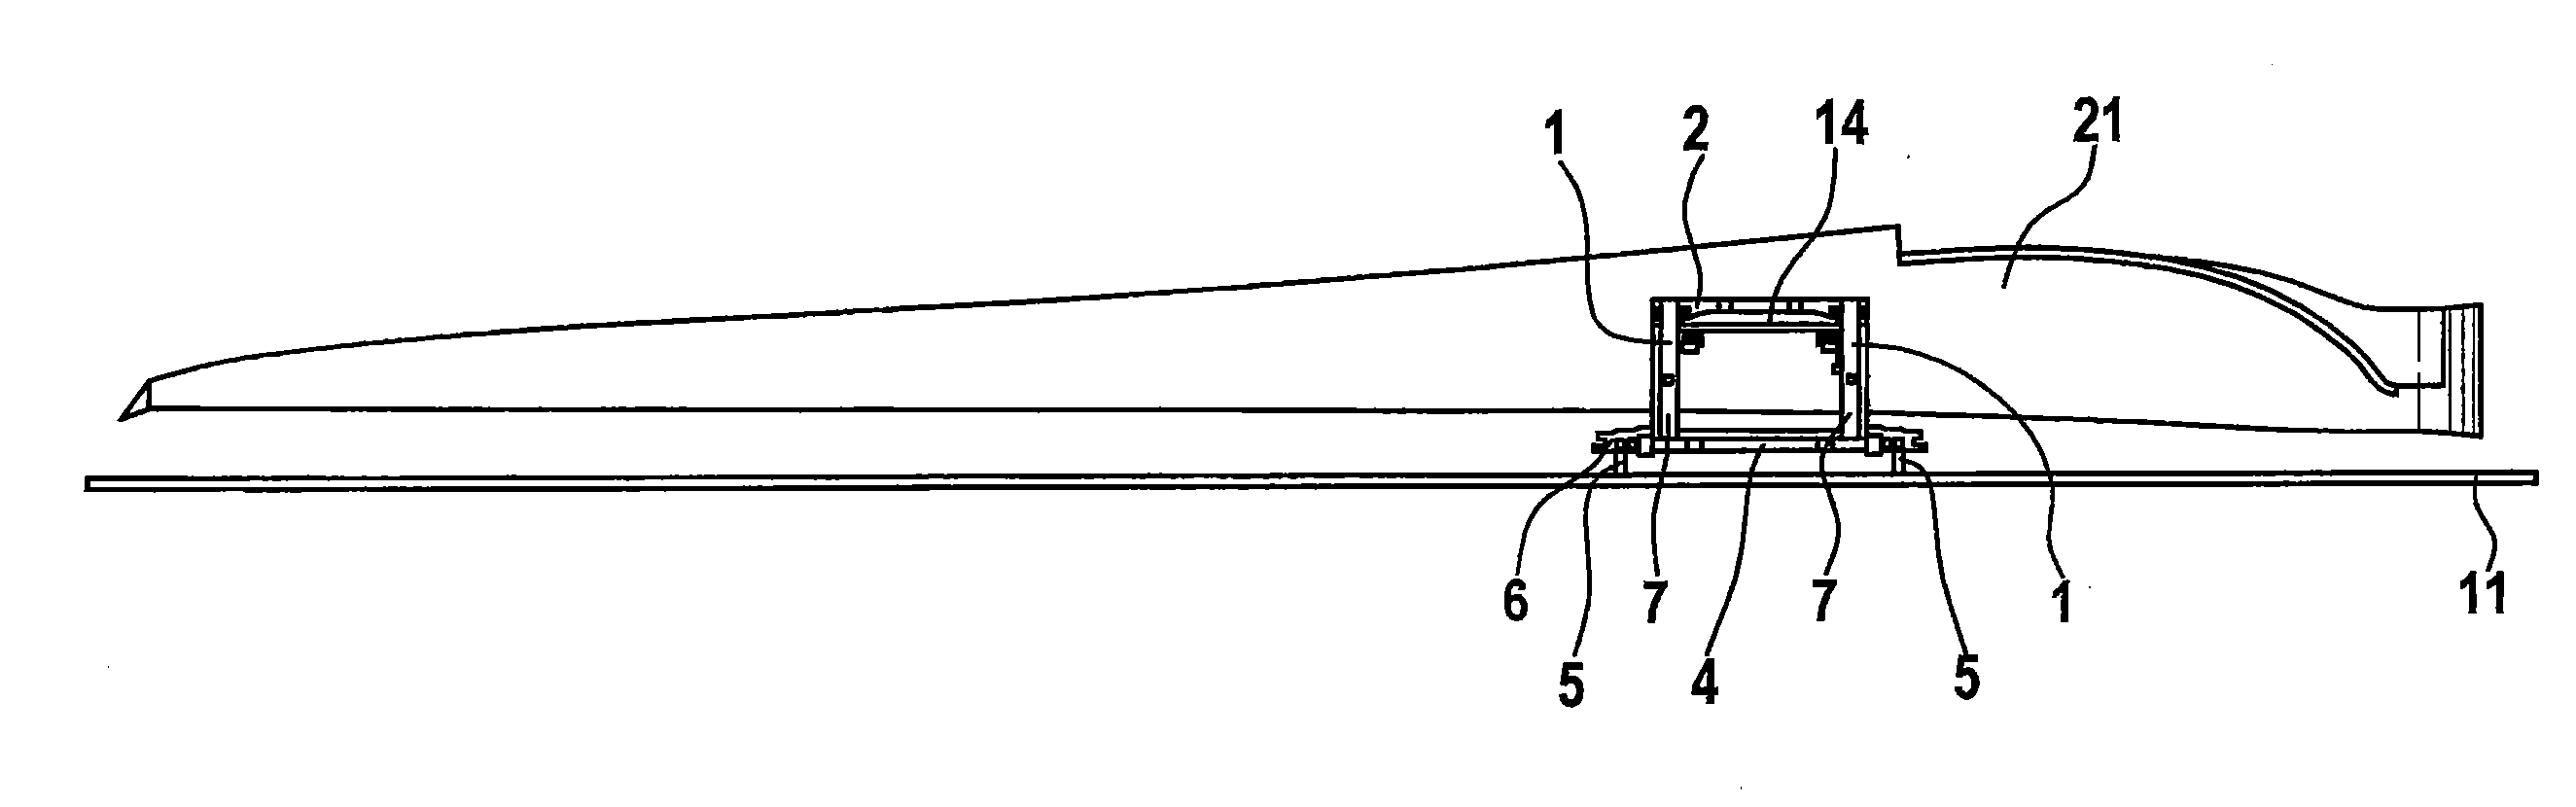 Device for handling a wind turbine rotor blade